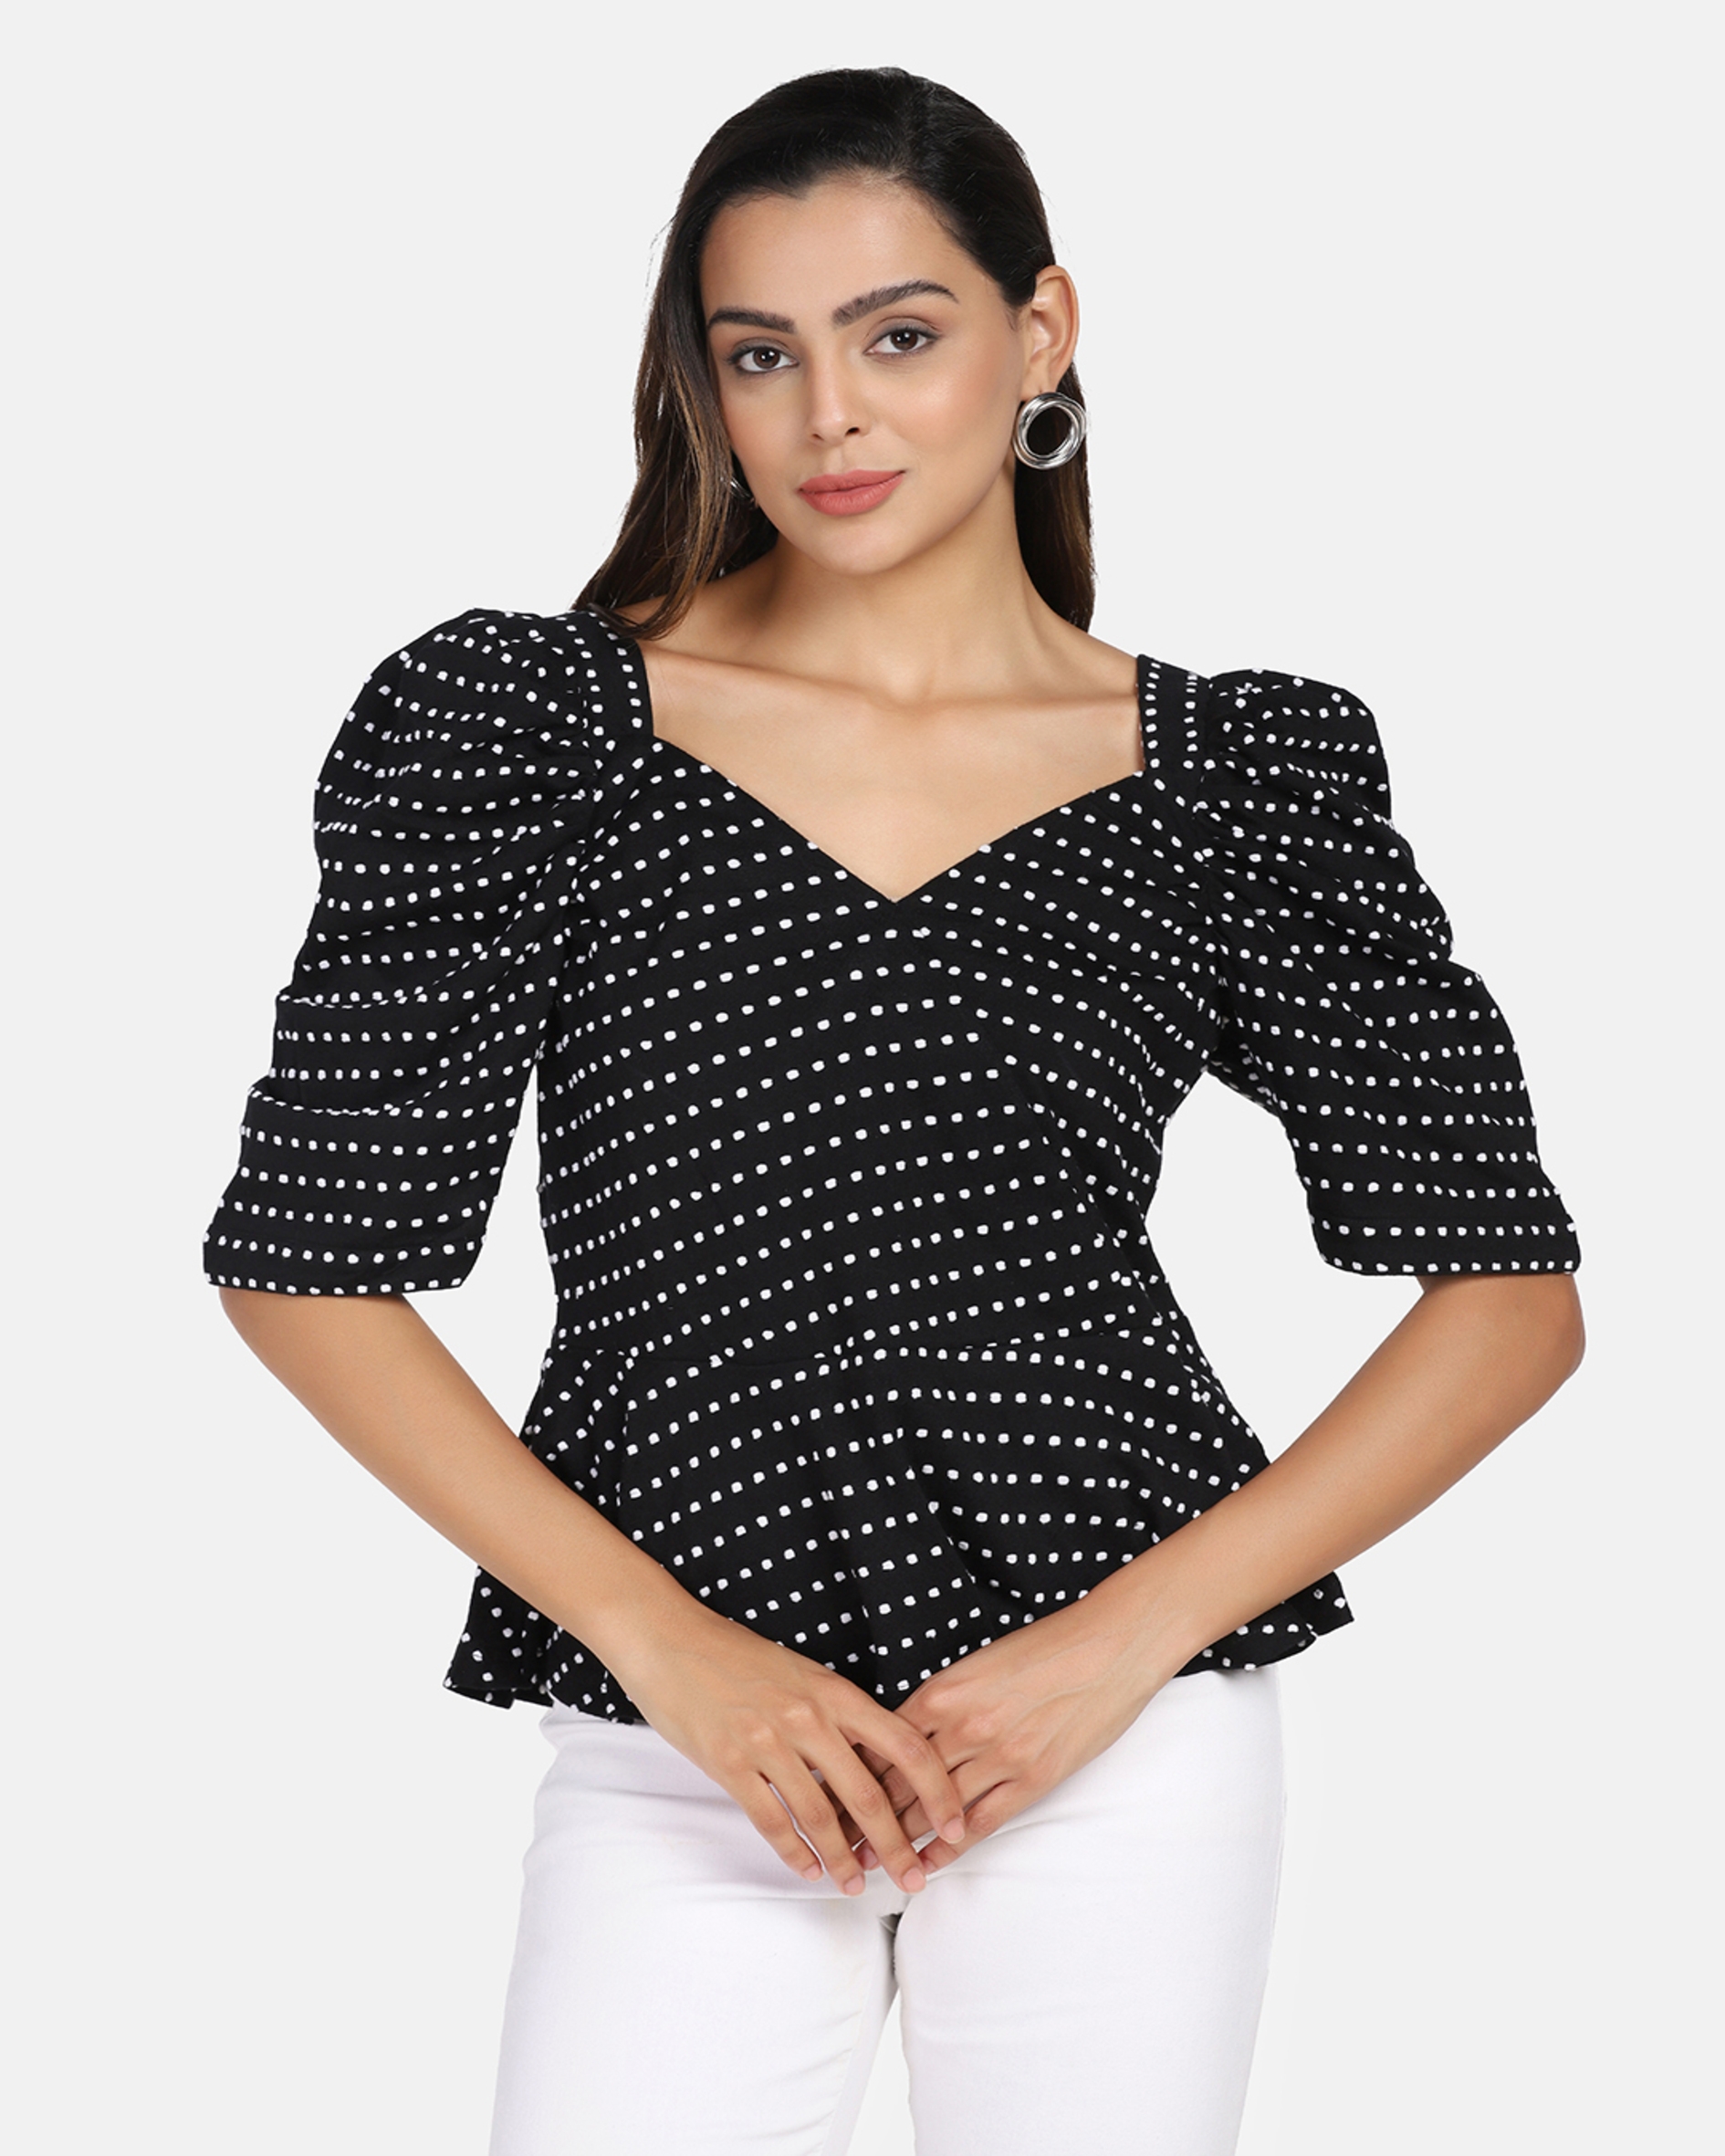 Inands | Black Top With White Dots undefined